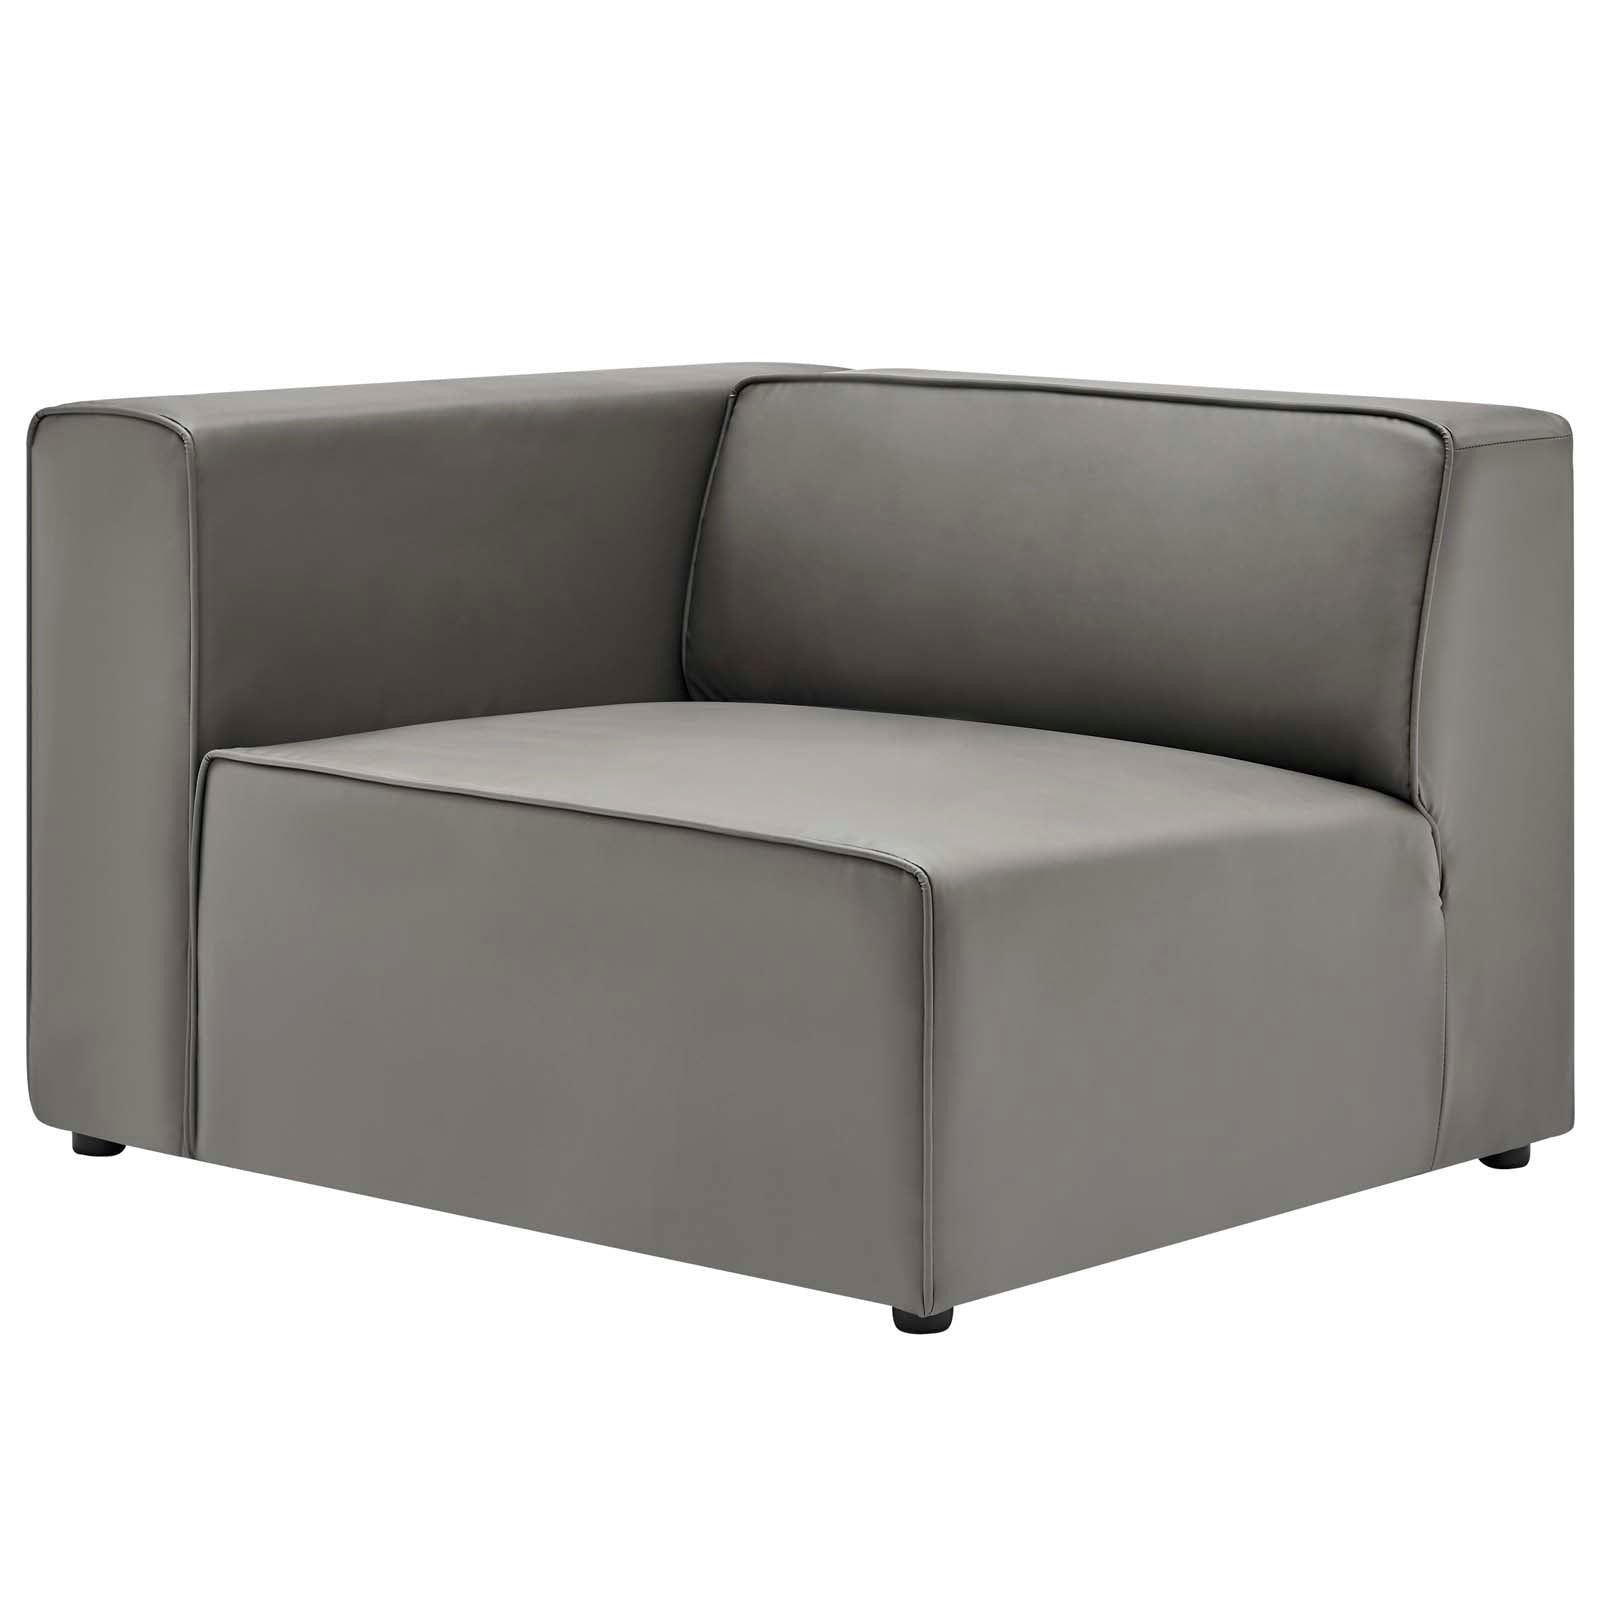 Modway Sectional Sofas - Mingle Vegan Leather 2-Piece Sectional Sofa Loveseat Gray